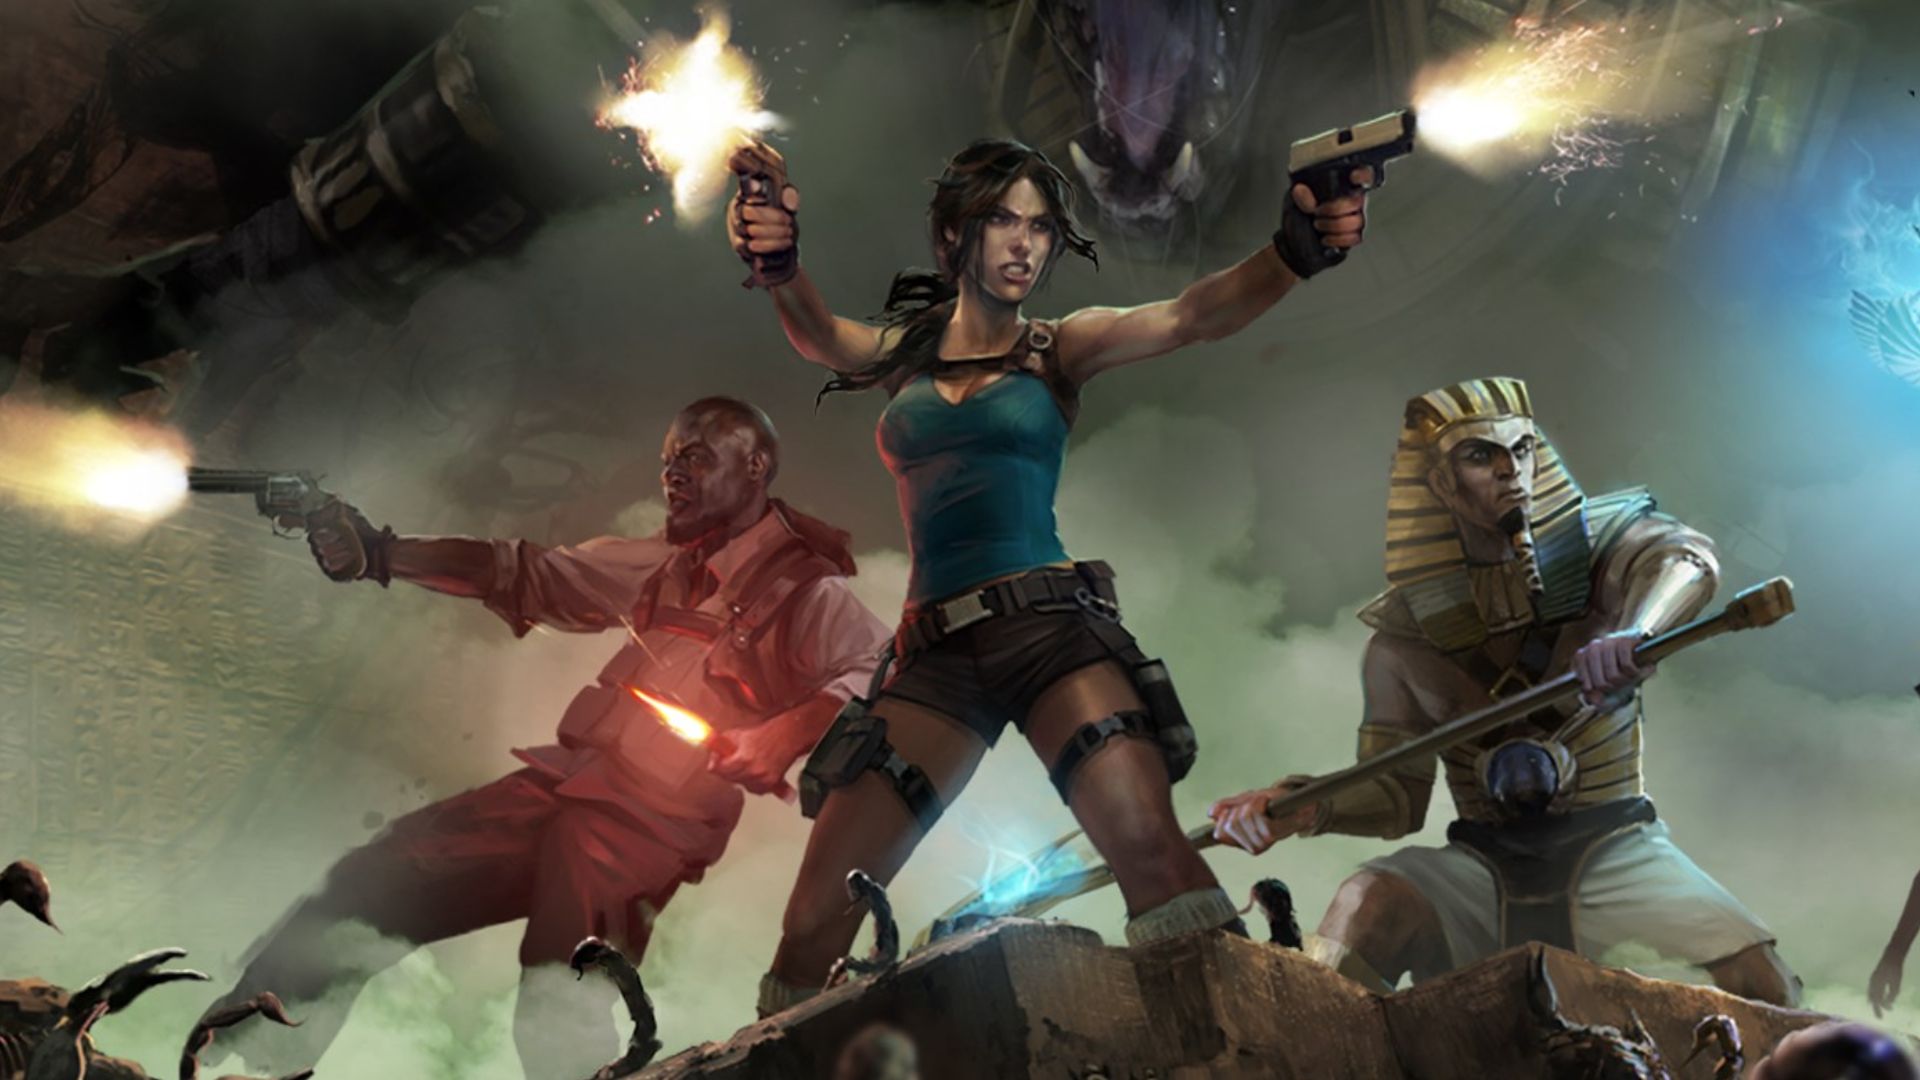 Here comes Lara, the Tomb Raider Switch release date is here